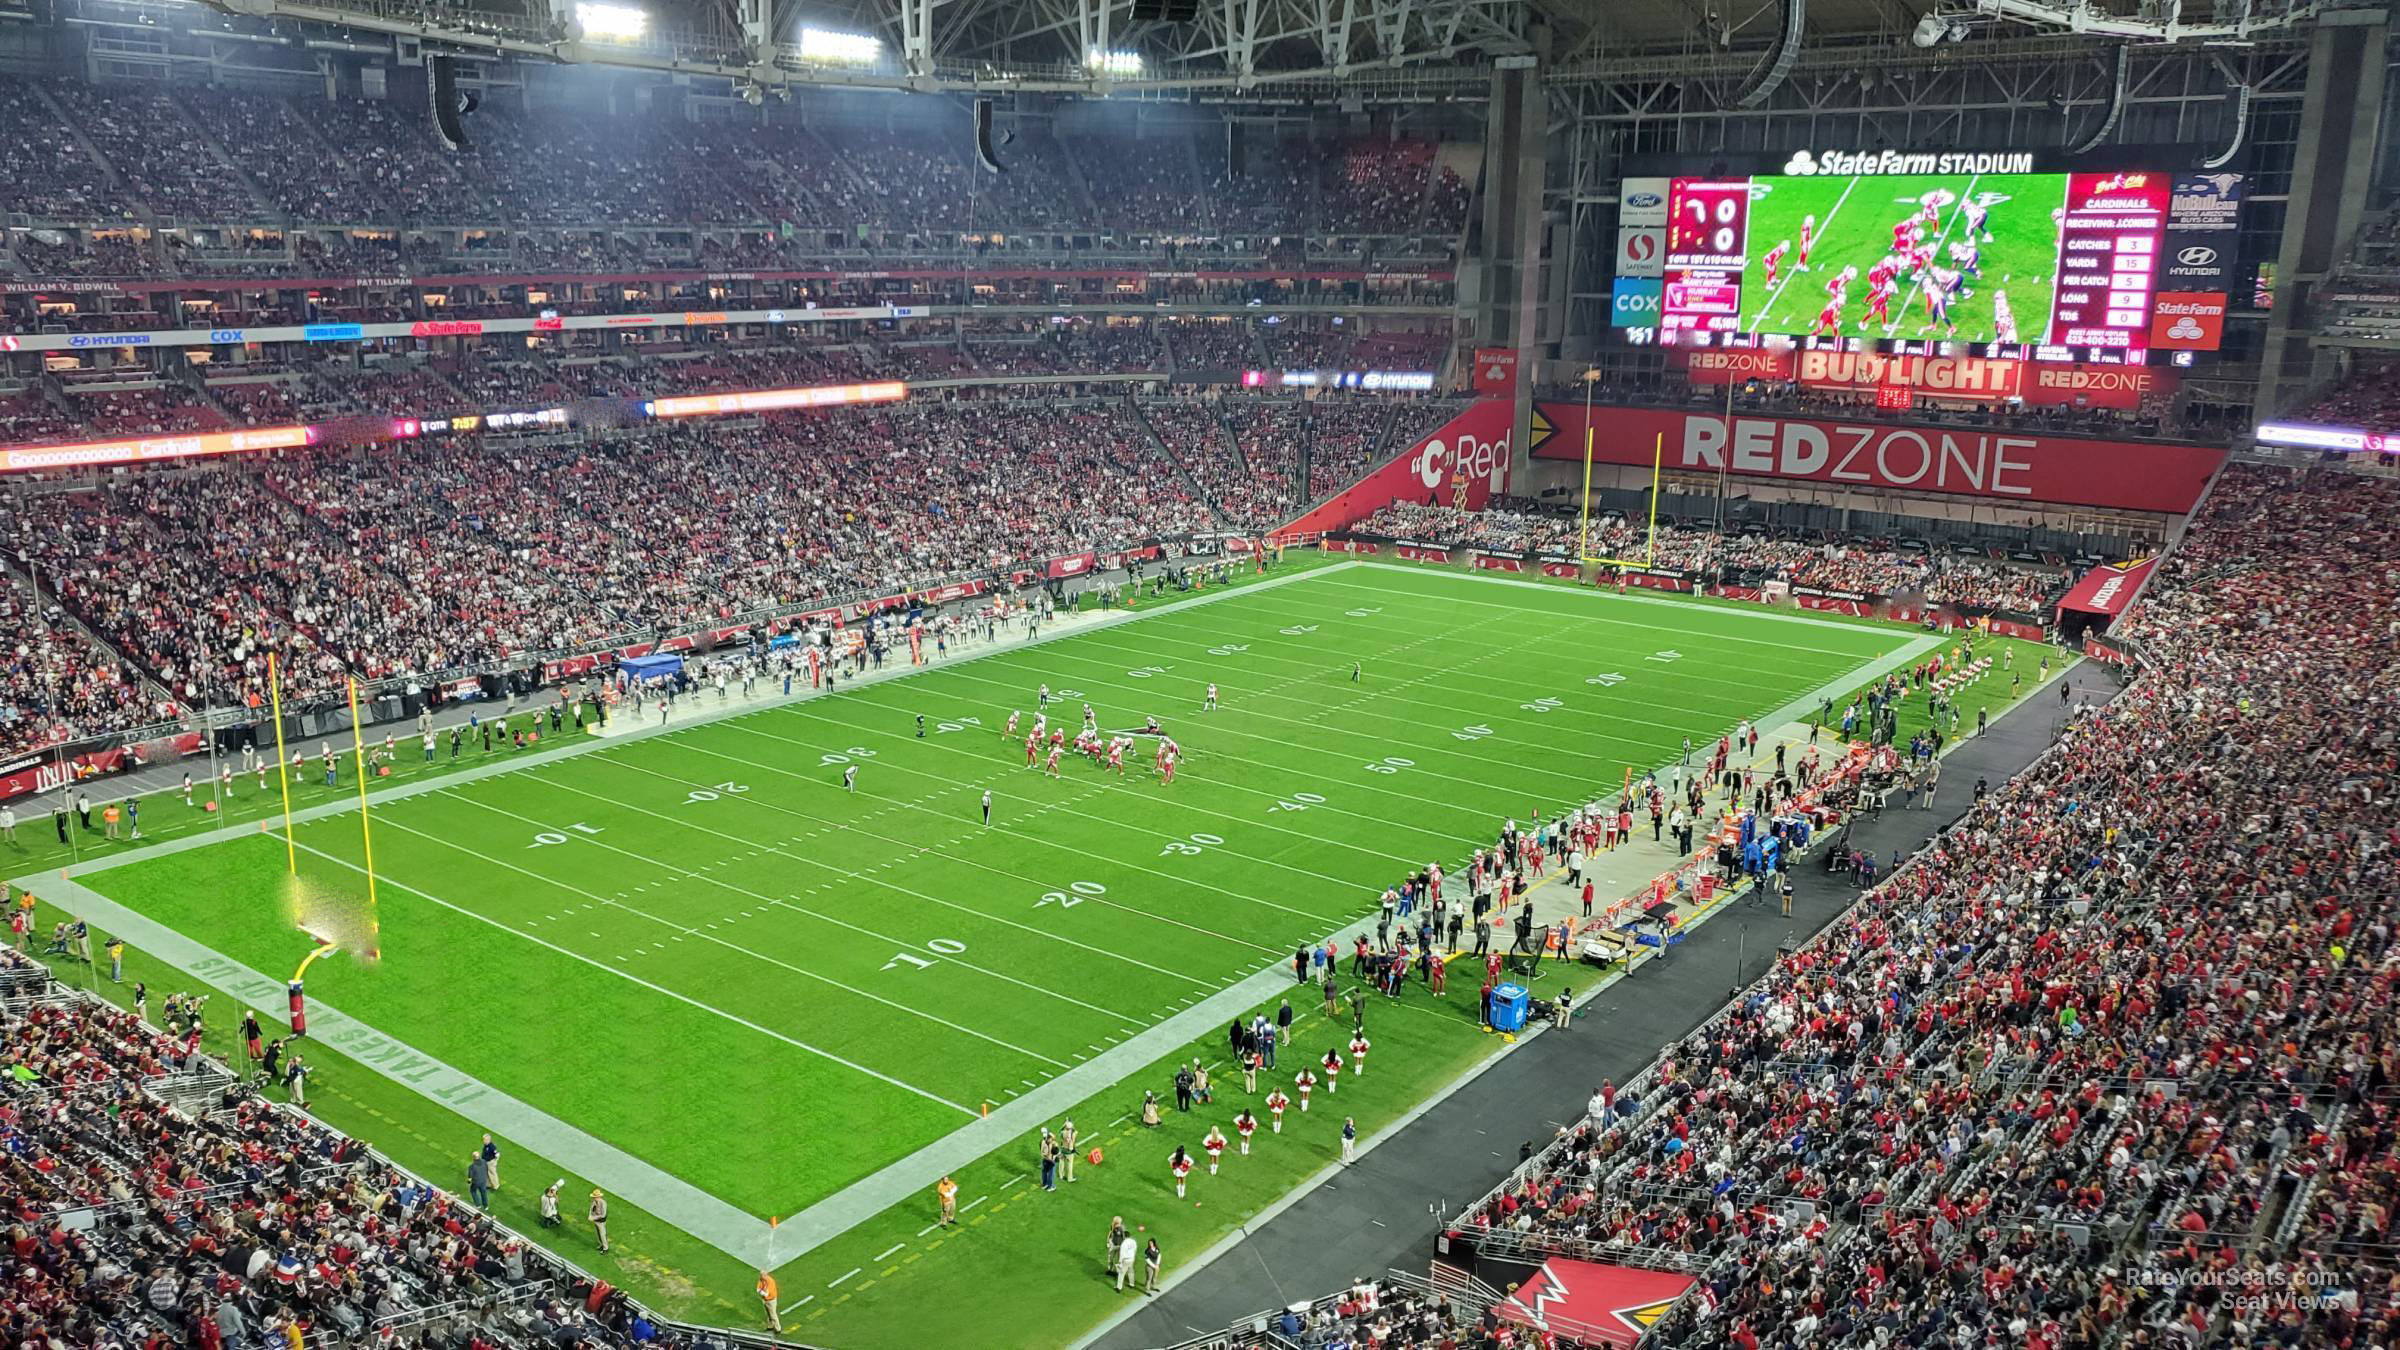 section 422, row 1 seat view  for football - state farm stadium